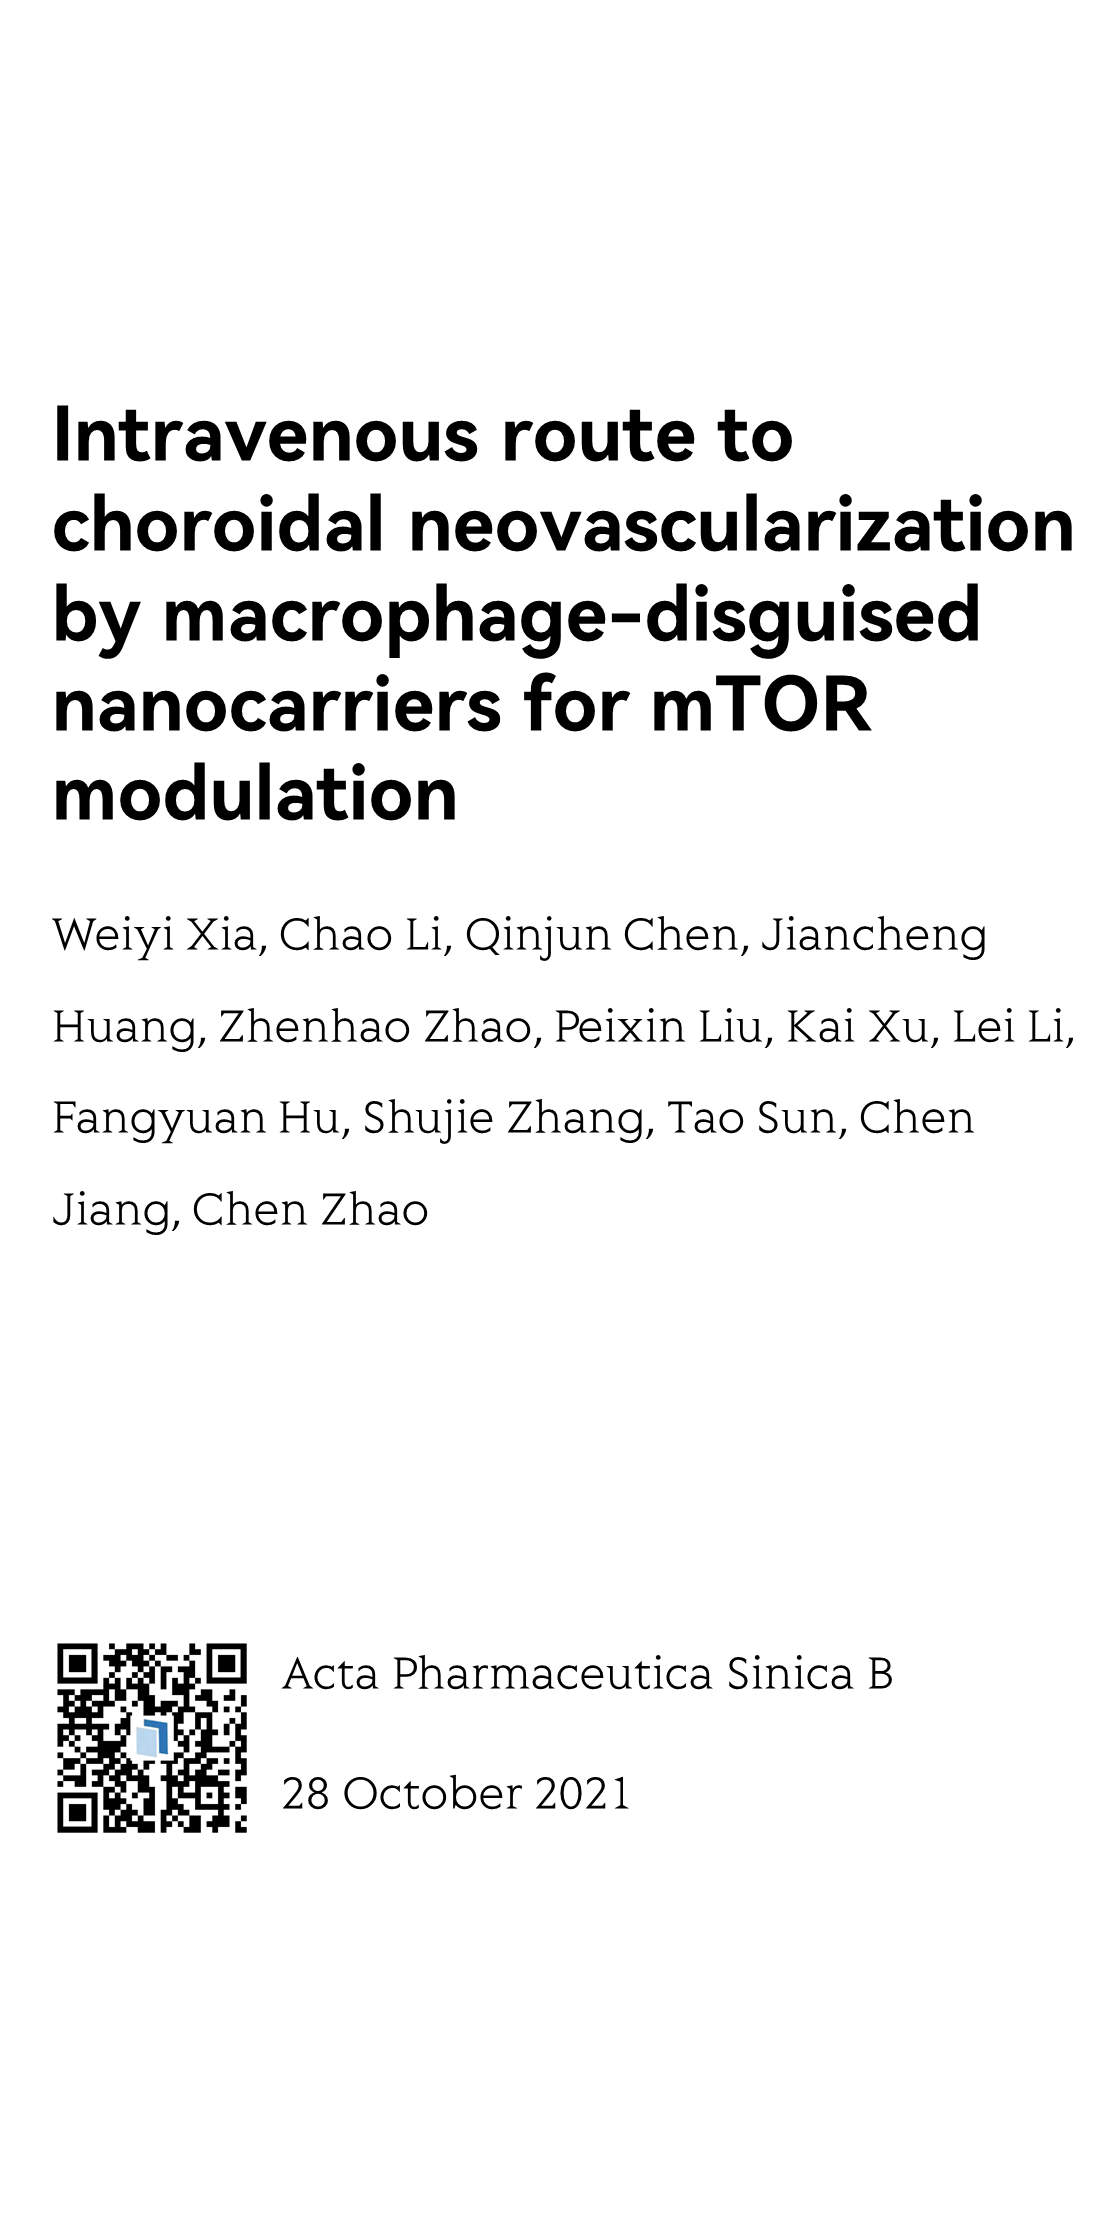 Intravenous route to choroidal neovascularization by macrophage-disguised nanocarriers for mTOR modulation_1